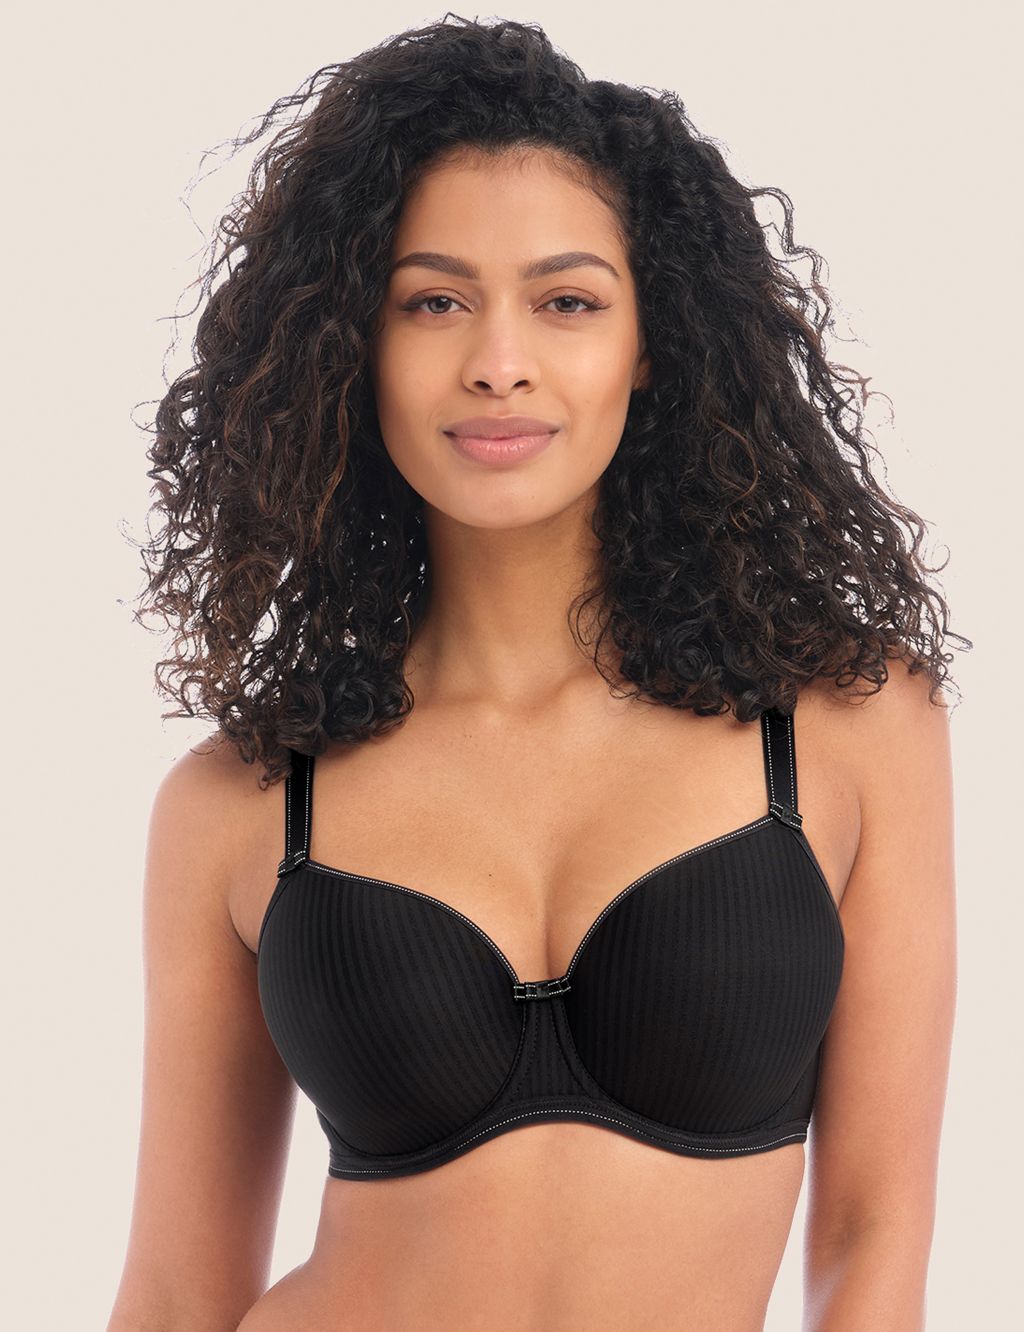 Idol Wired Moulded Balcony Bra D-HH